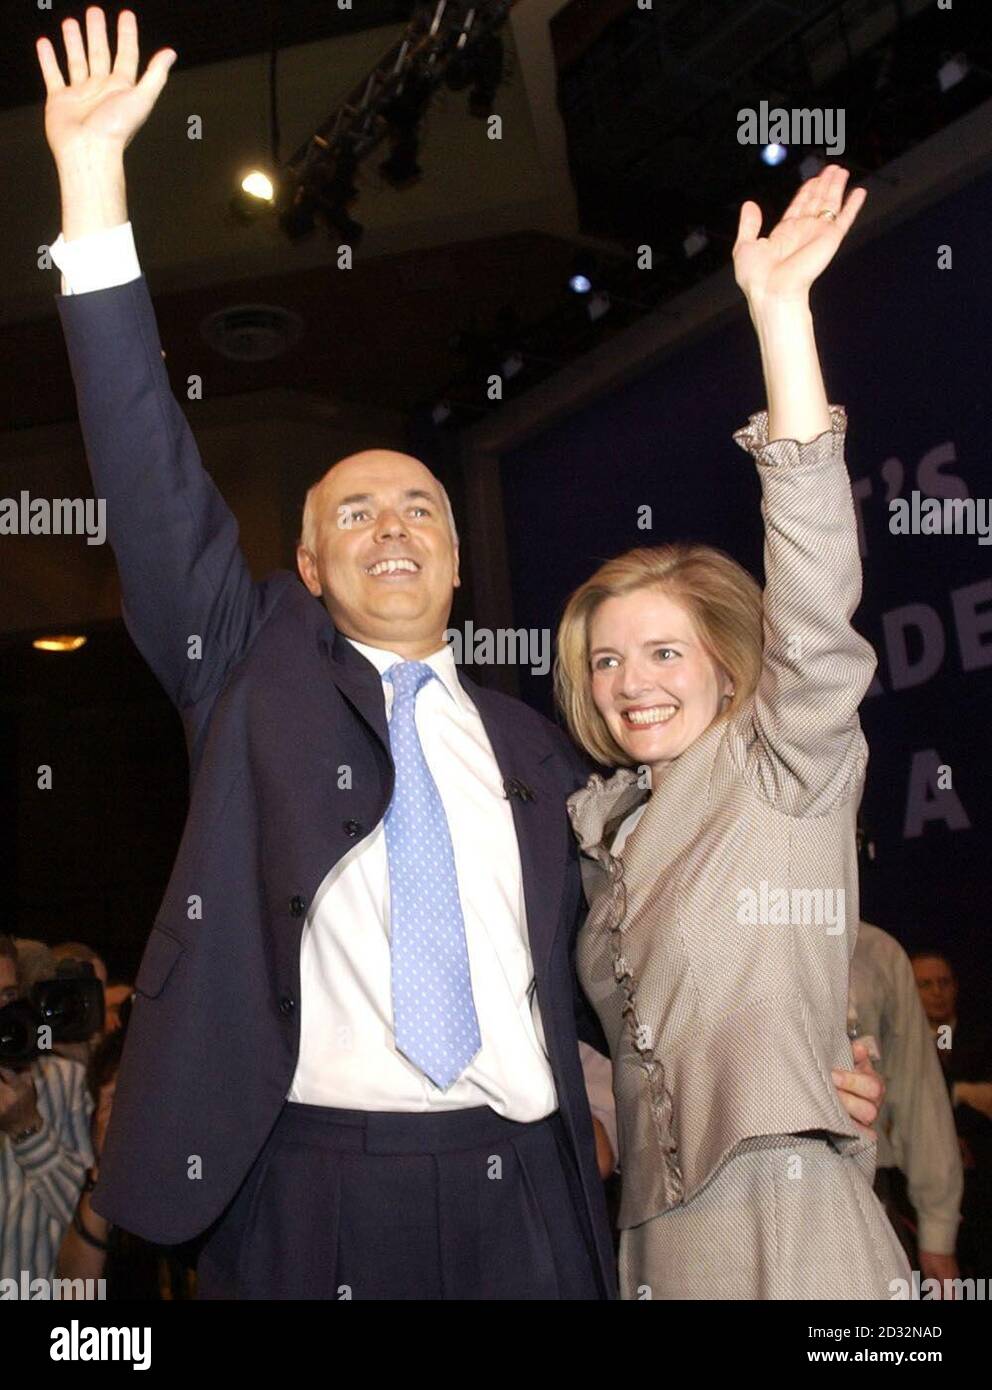 Conservative leader Iain Duncan Smith and wife Betsy acknowledge the applause from delegates after making his keynote speech to the Conservative Party Conference in Bournemouth. Stock Photo